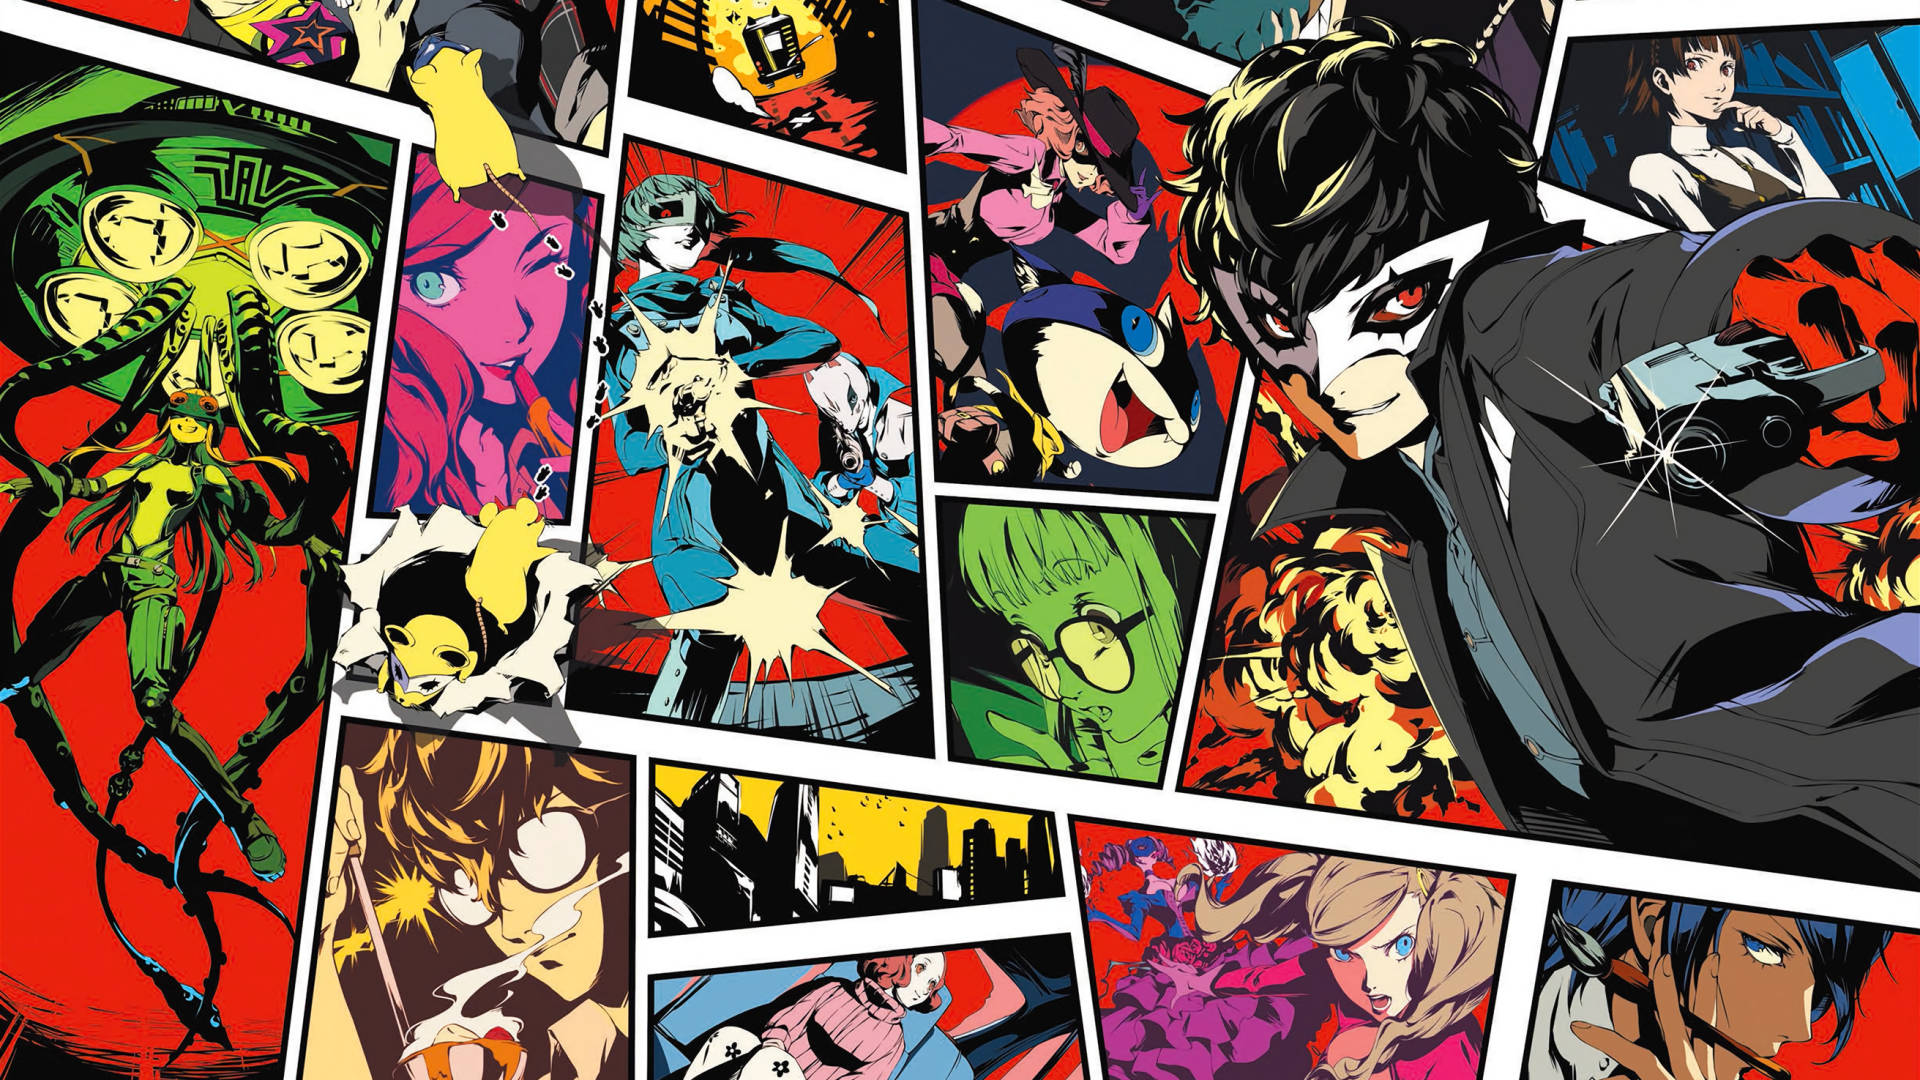 Persona 5 Royal 1920X1080 Wallpaper and Background Image